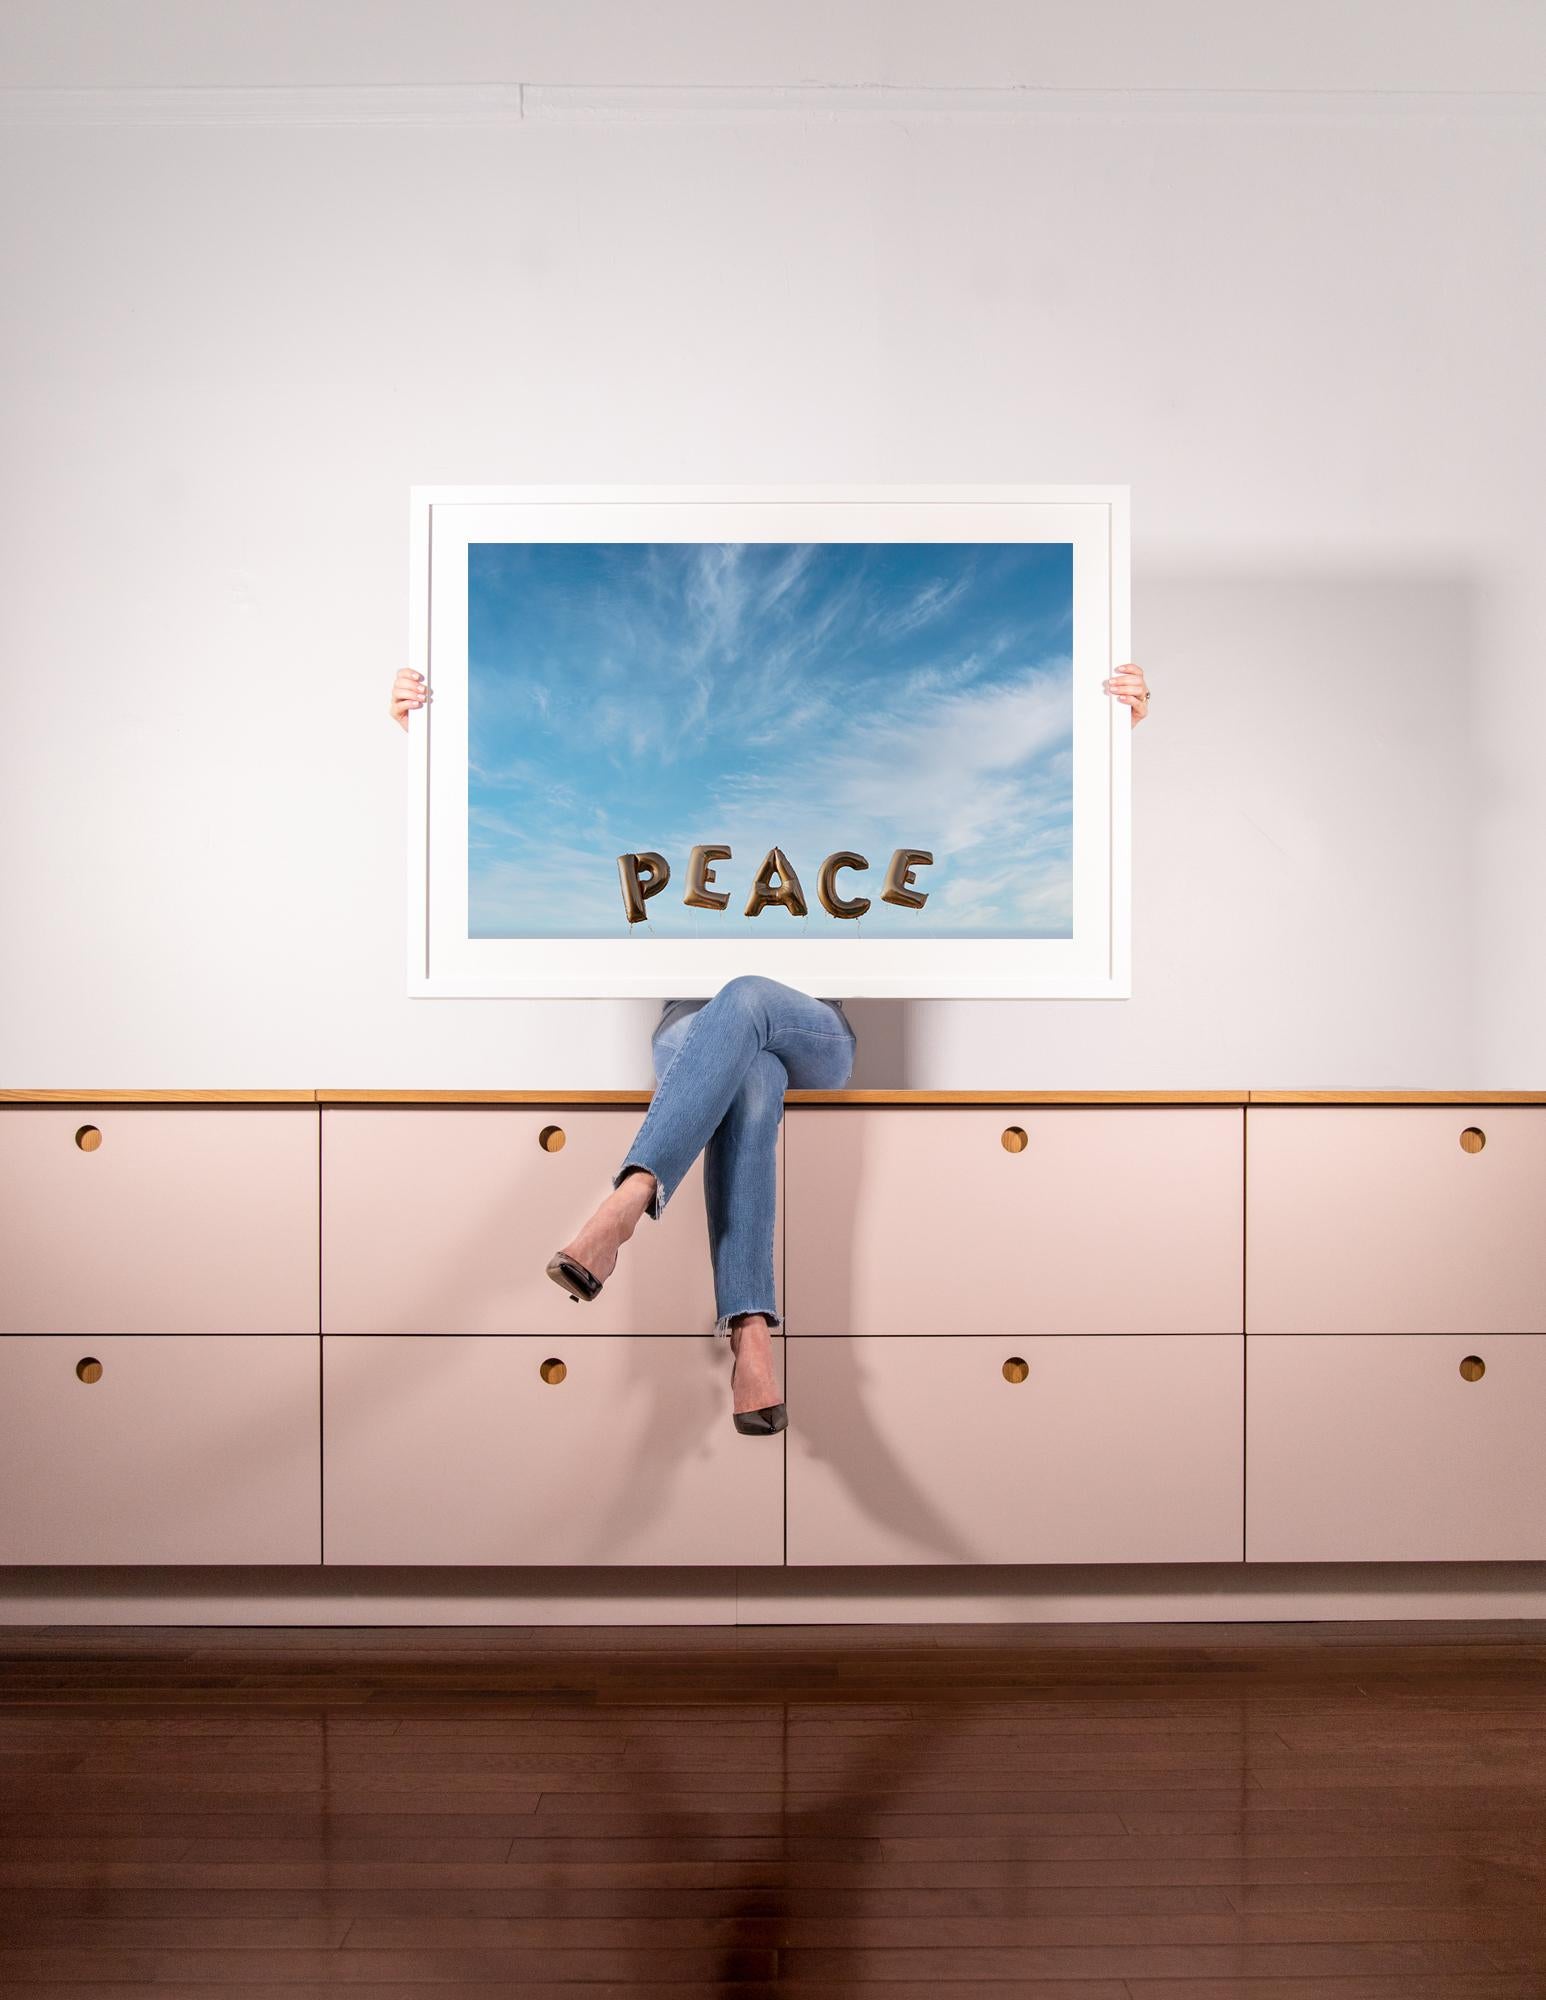 PEACE - Photograph by Max Wanger